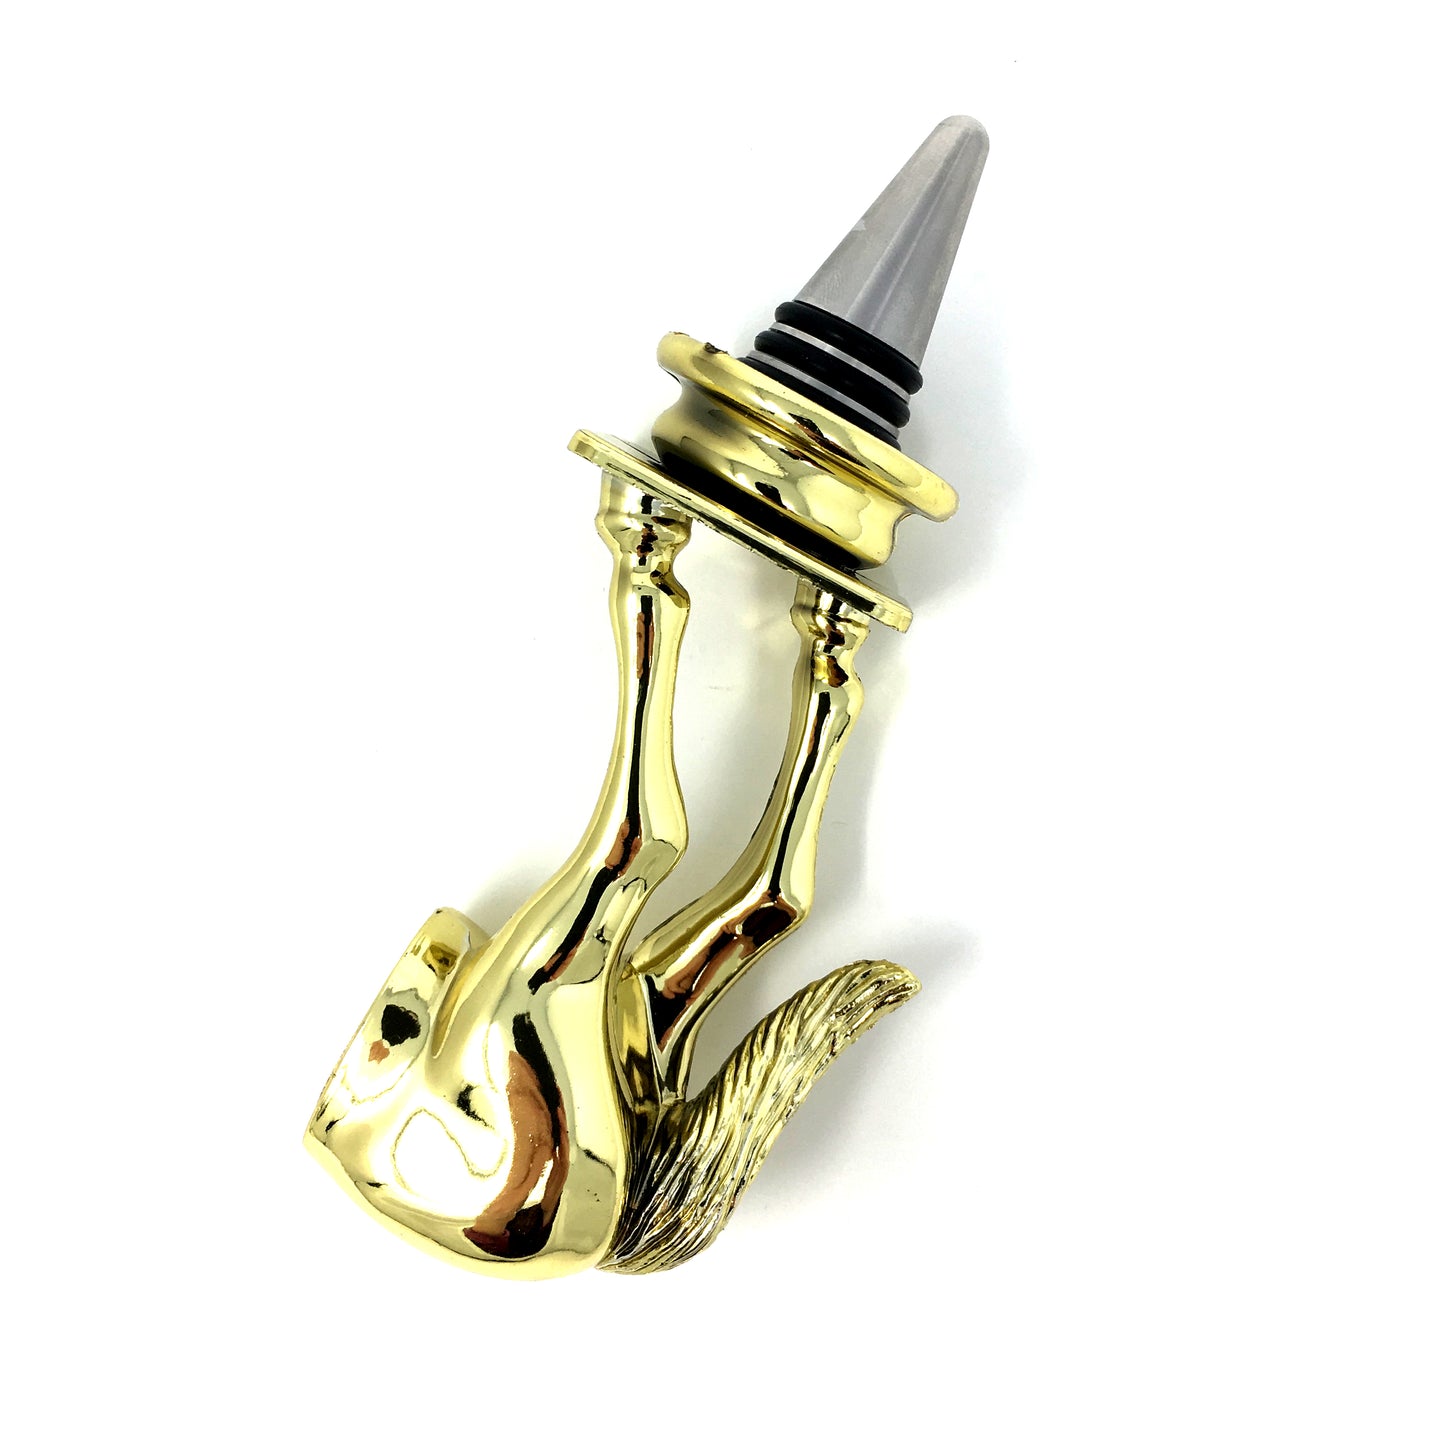 Horse's Rear Trophy Wine Bottle Stopper with Stainless Steel Base